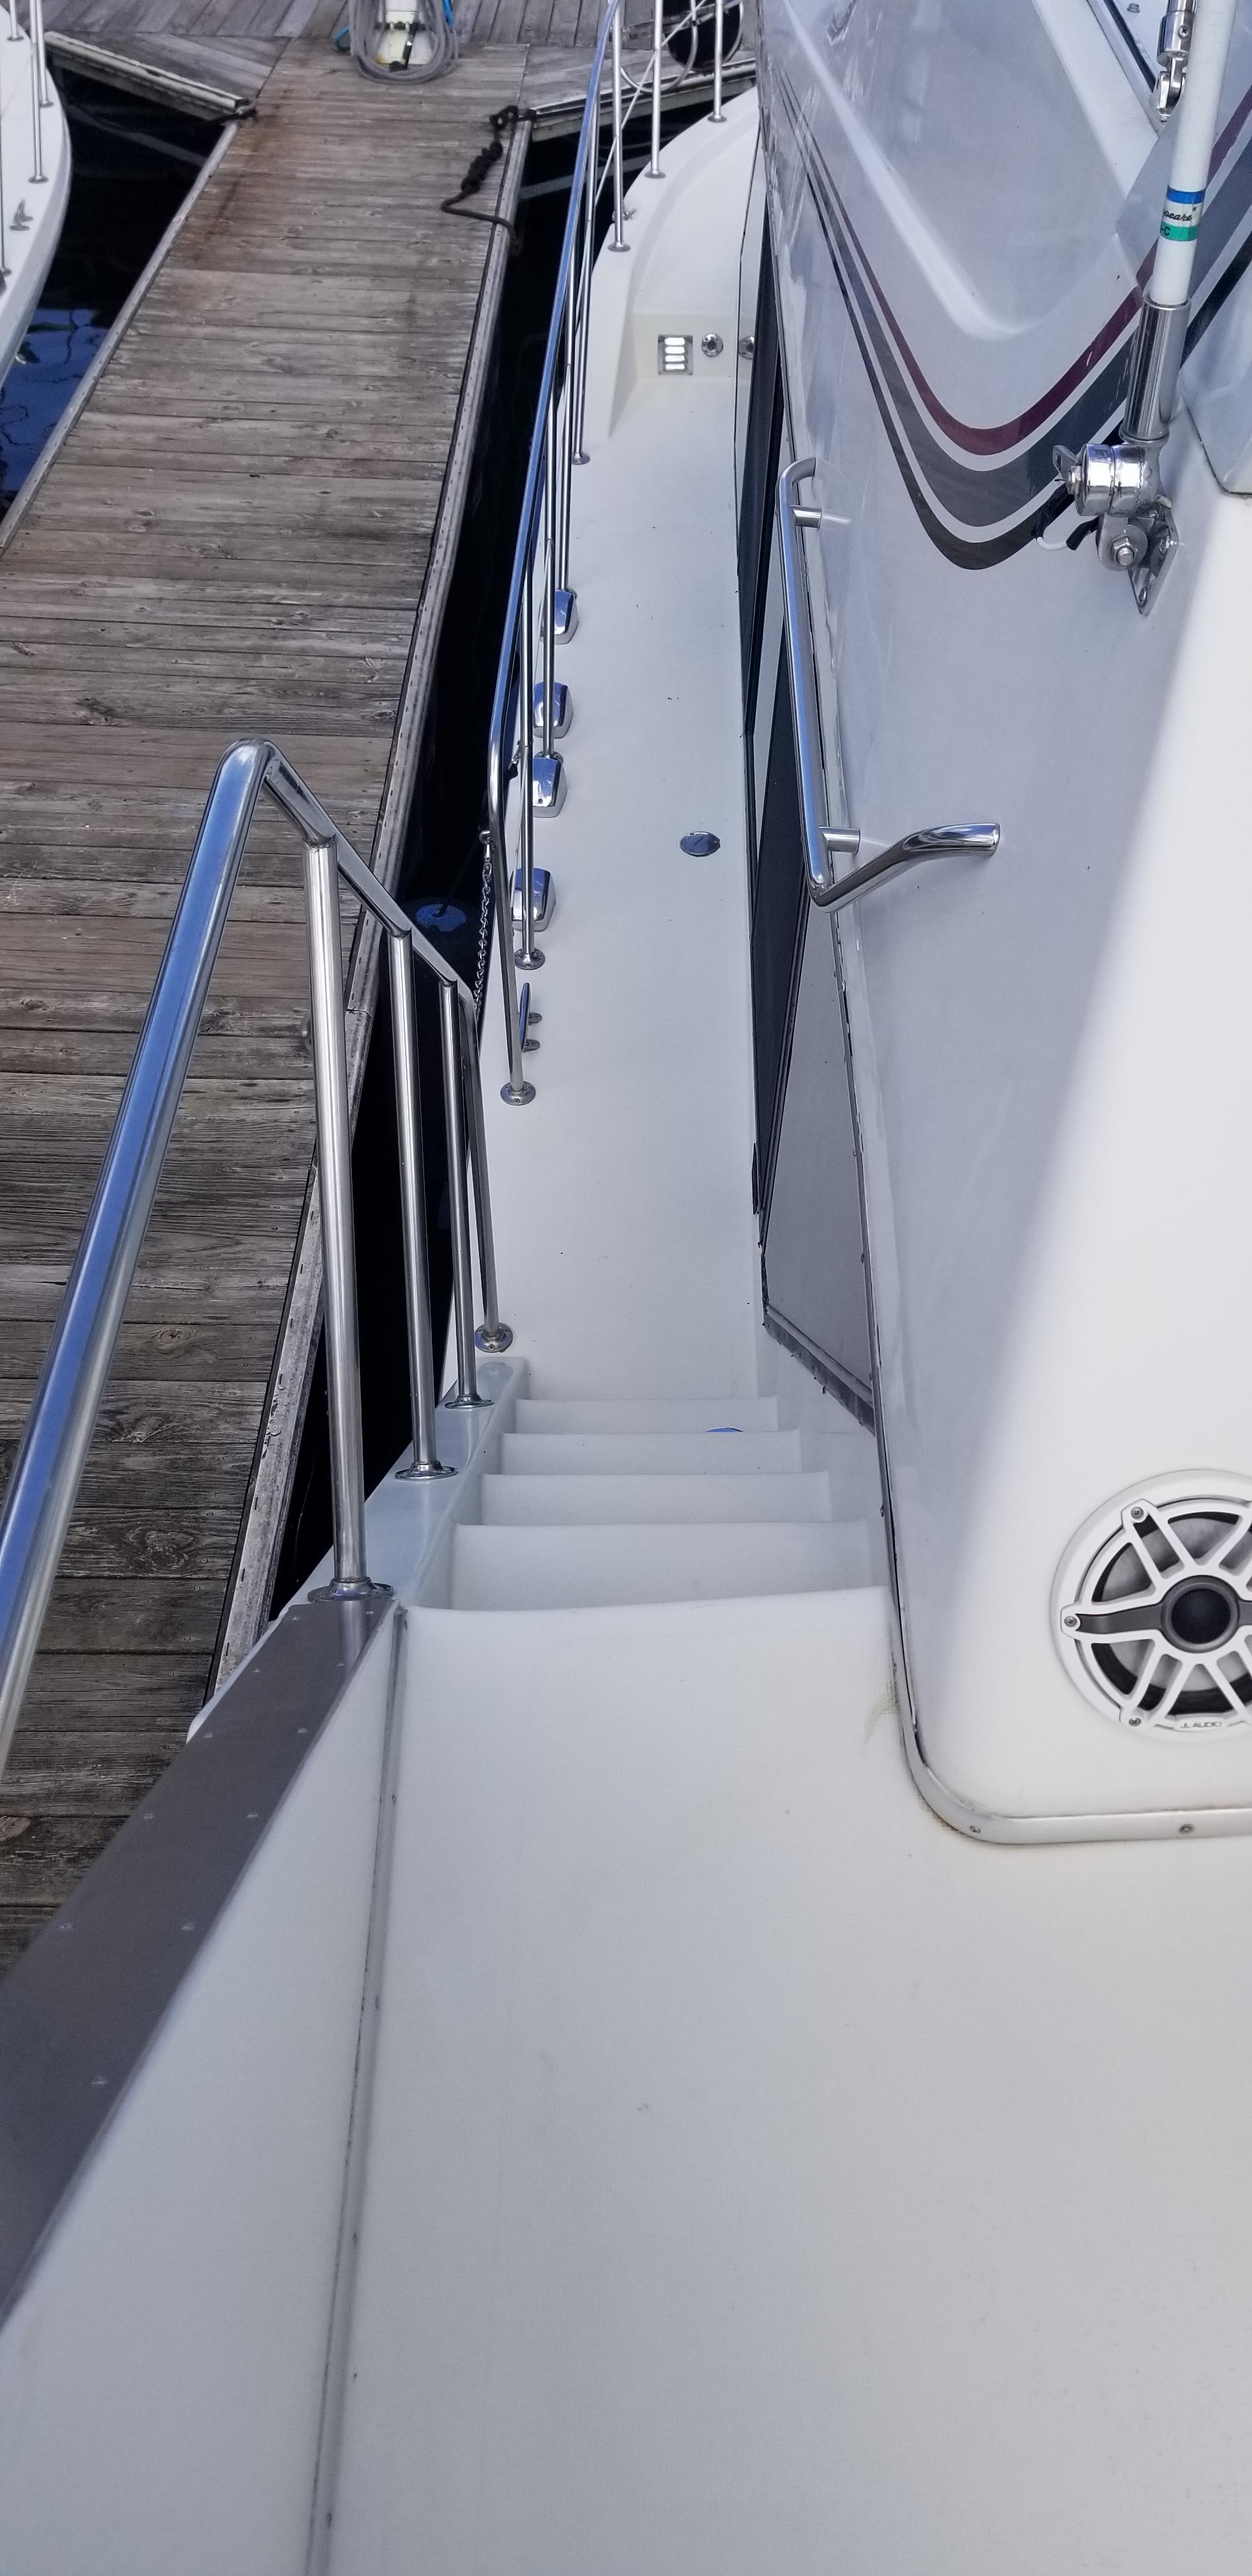 1991 Bluewater Yachts Cockpit Motor Yacht